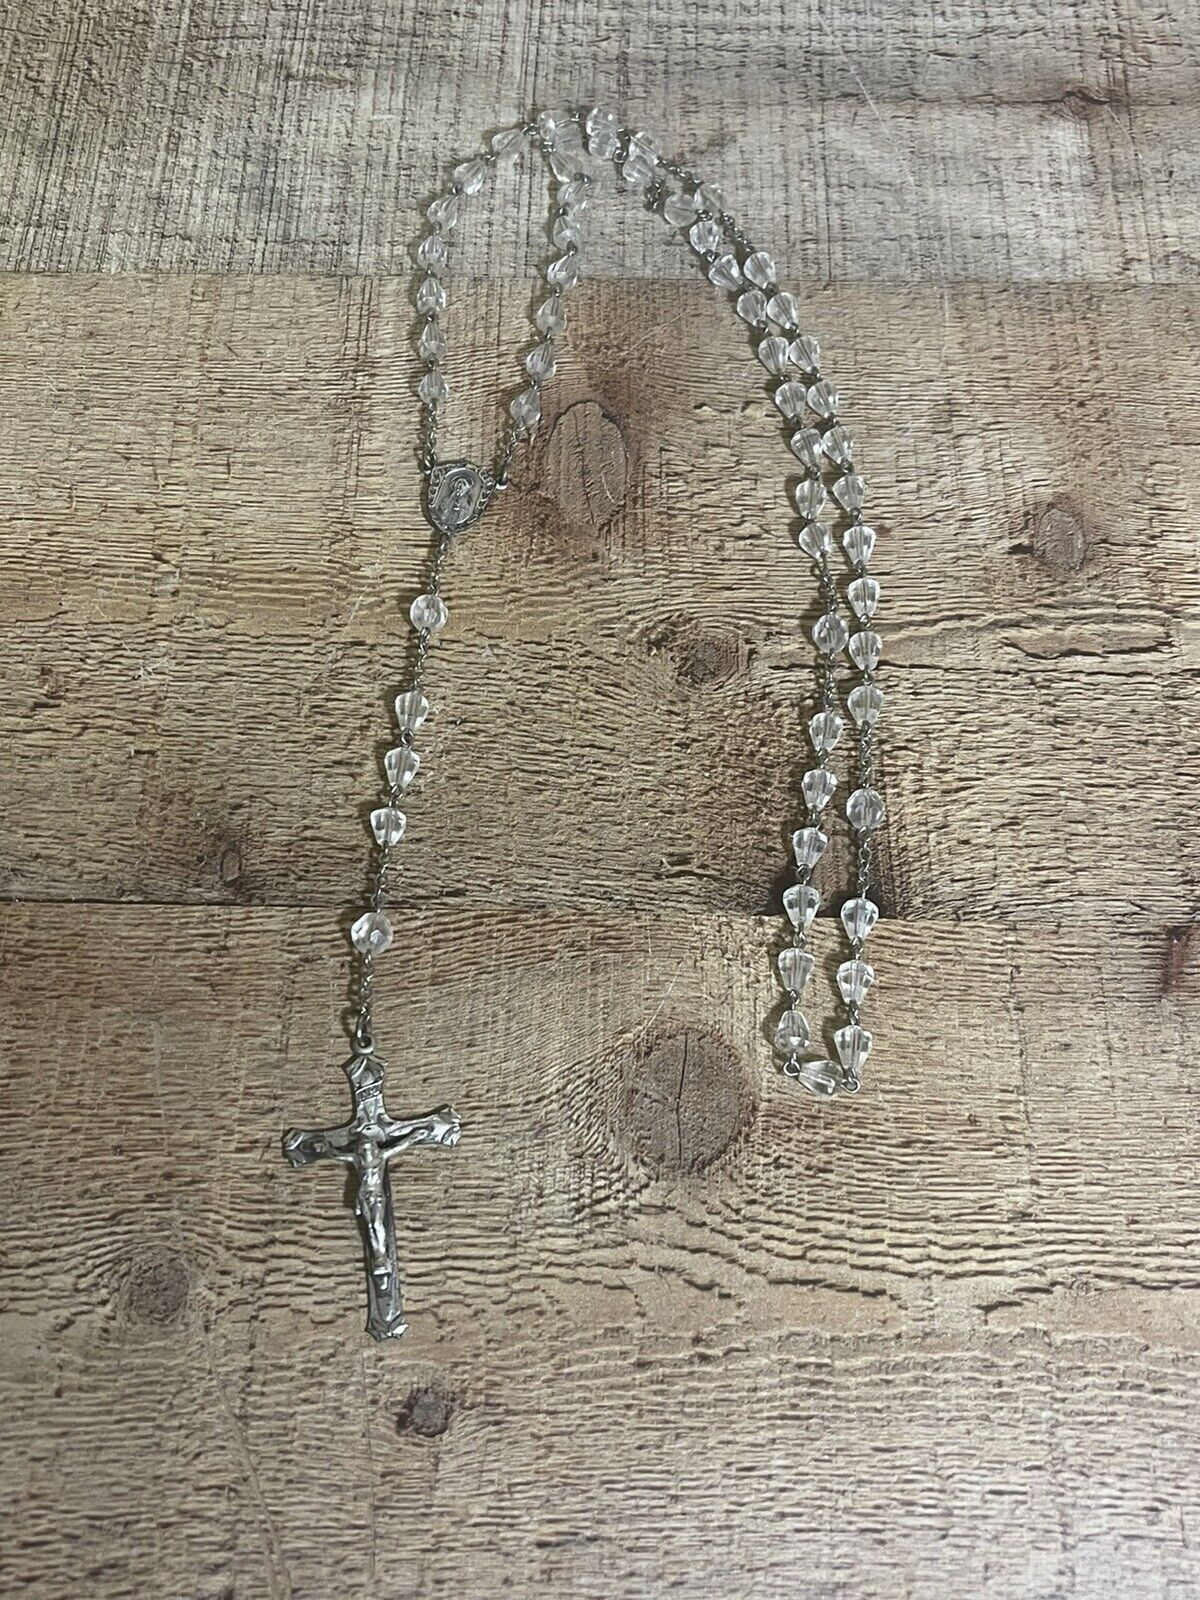 STUNNING RARE VINTAGE CATAMORE STERLING SILVER NUNS ROSARY 